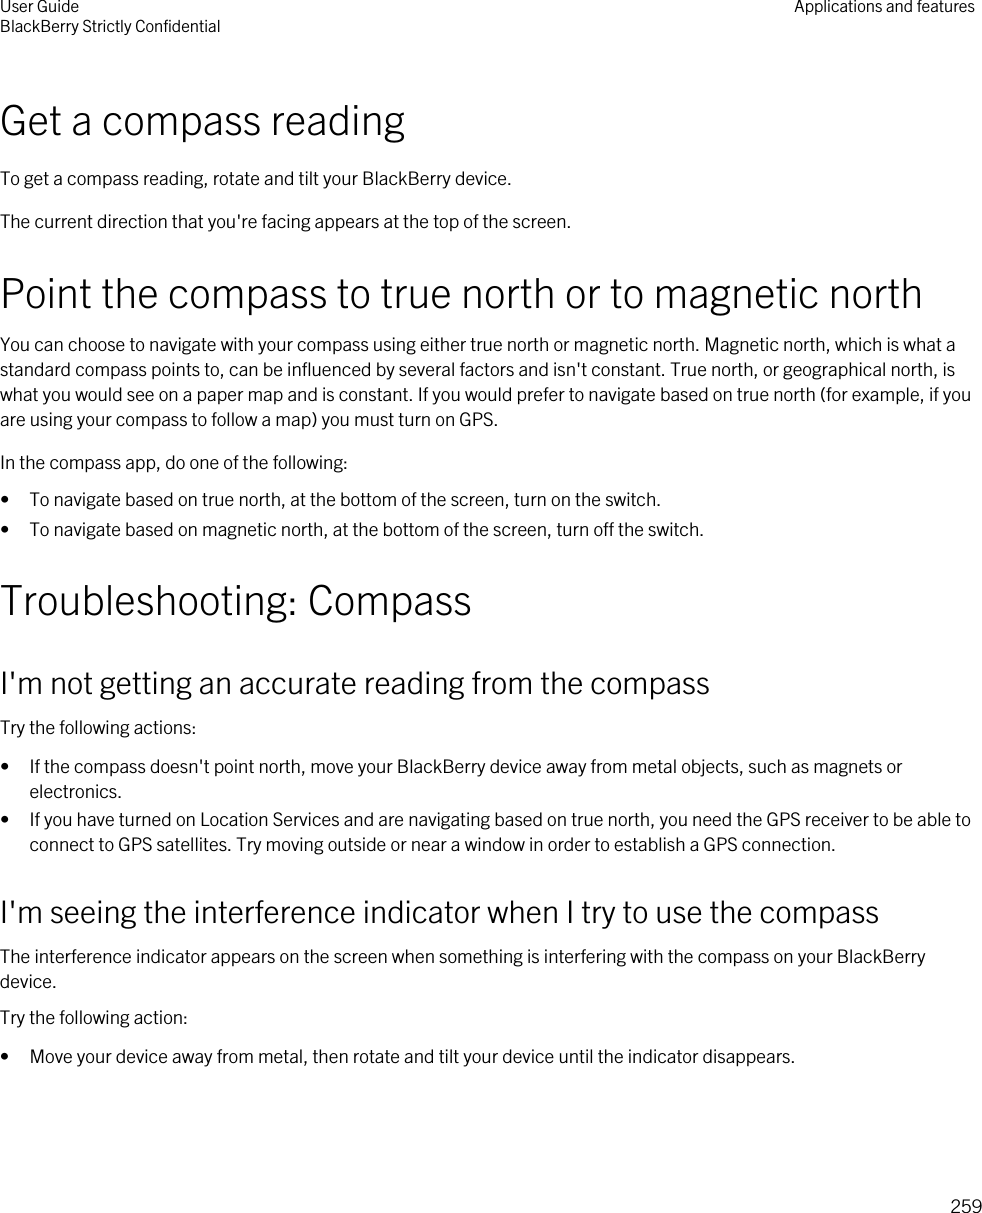 Get a compass readingTo get a compass reading, rotate and tilt your BlackBerry device.The current direction that you&apos;re facing appears at the top of the screen.Point the compass to true north or to magnetic northYou can choose to navigate with your compass using either true north or magnetic north. Magnetic north, which is what a standard compass points to, can be influenced by several factors and isn&apos;t constant. True north, or geographical north, is what you would see on a paper map and is constant. If you would prefer to navigate based on true north (for example, if you are using your compass to follow a map) you must turn on GPS.In the compass app, do one of the following:• To navigate based on true north, at the bottom of the screen, turn on the switch.• To navigate based on magnetic north, at the bottom of the screen, turn off the switch.Troubleshooting: CompassI&apos;m not getting an accurate reading from the compassTry the following actions:• If the compass doesn&apos;t point north, move your BlackBerry device away from metal objects, such as magnets or electronics.• If you have turned on Location Services and are navigating based on true north, you need the GPS receiver to be able to connect to GPS satellites. Try moving outside or near a window in order to establish a GPS connection.I&apos;m seeing the interference indicator when I try to use the compassThe interference indicator appears on the screen when something is interfering with the compass on your BlackBerry device.Try the following action:• Move your device away from metal, then rotate and tilt your device until the indicator disappears.User GuideBlackBerry Strictly Confidential Applications and features259